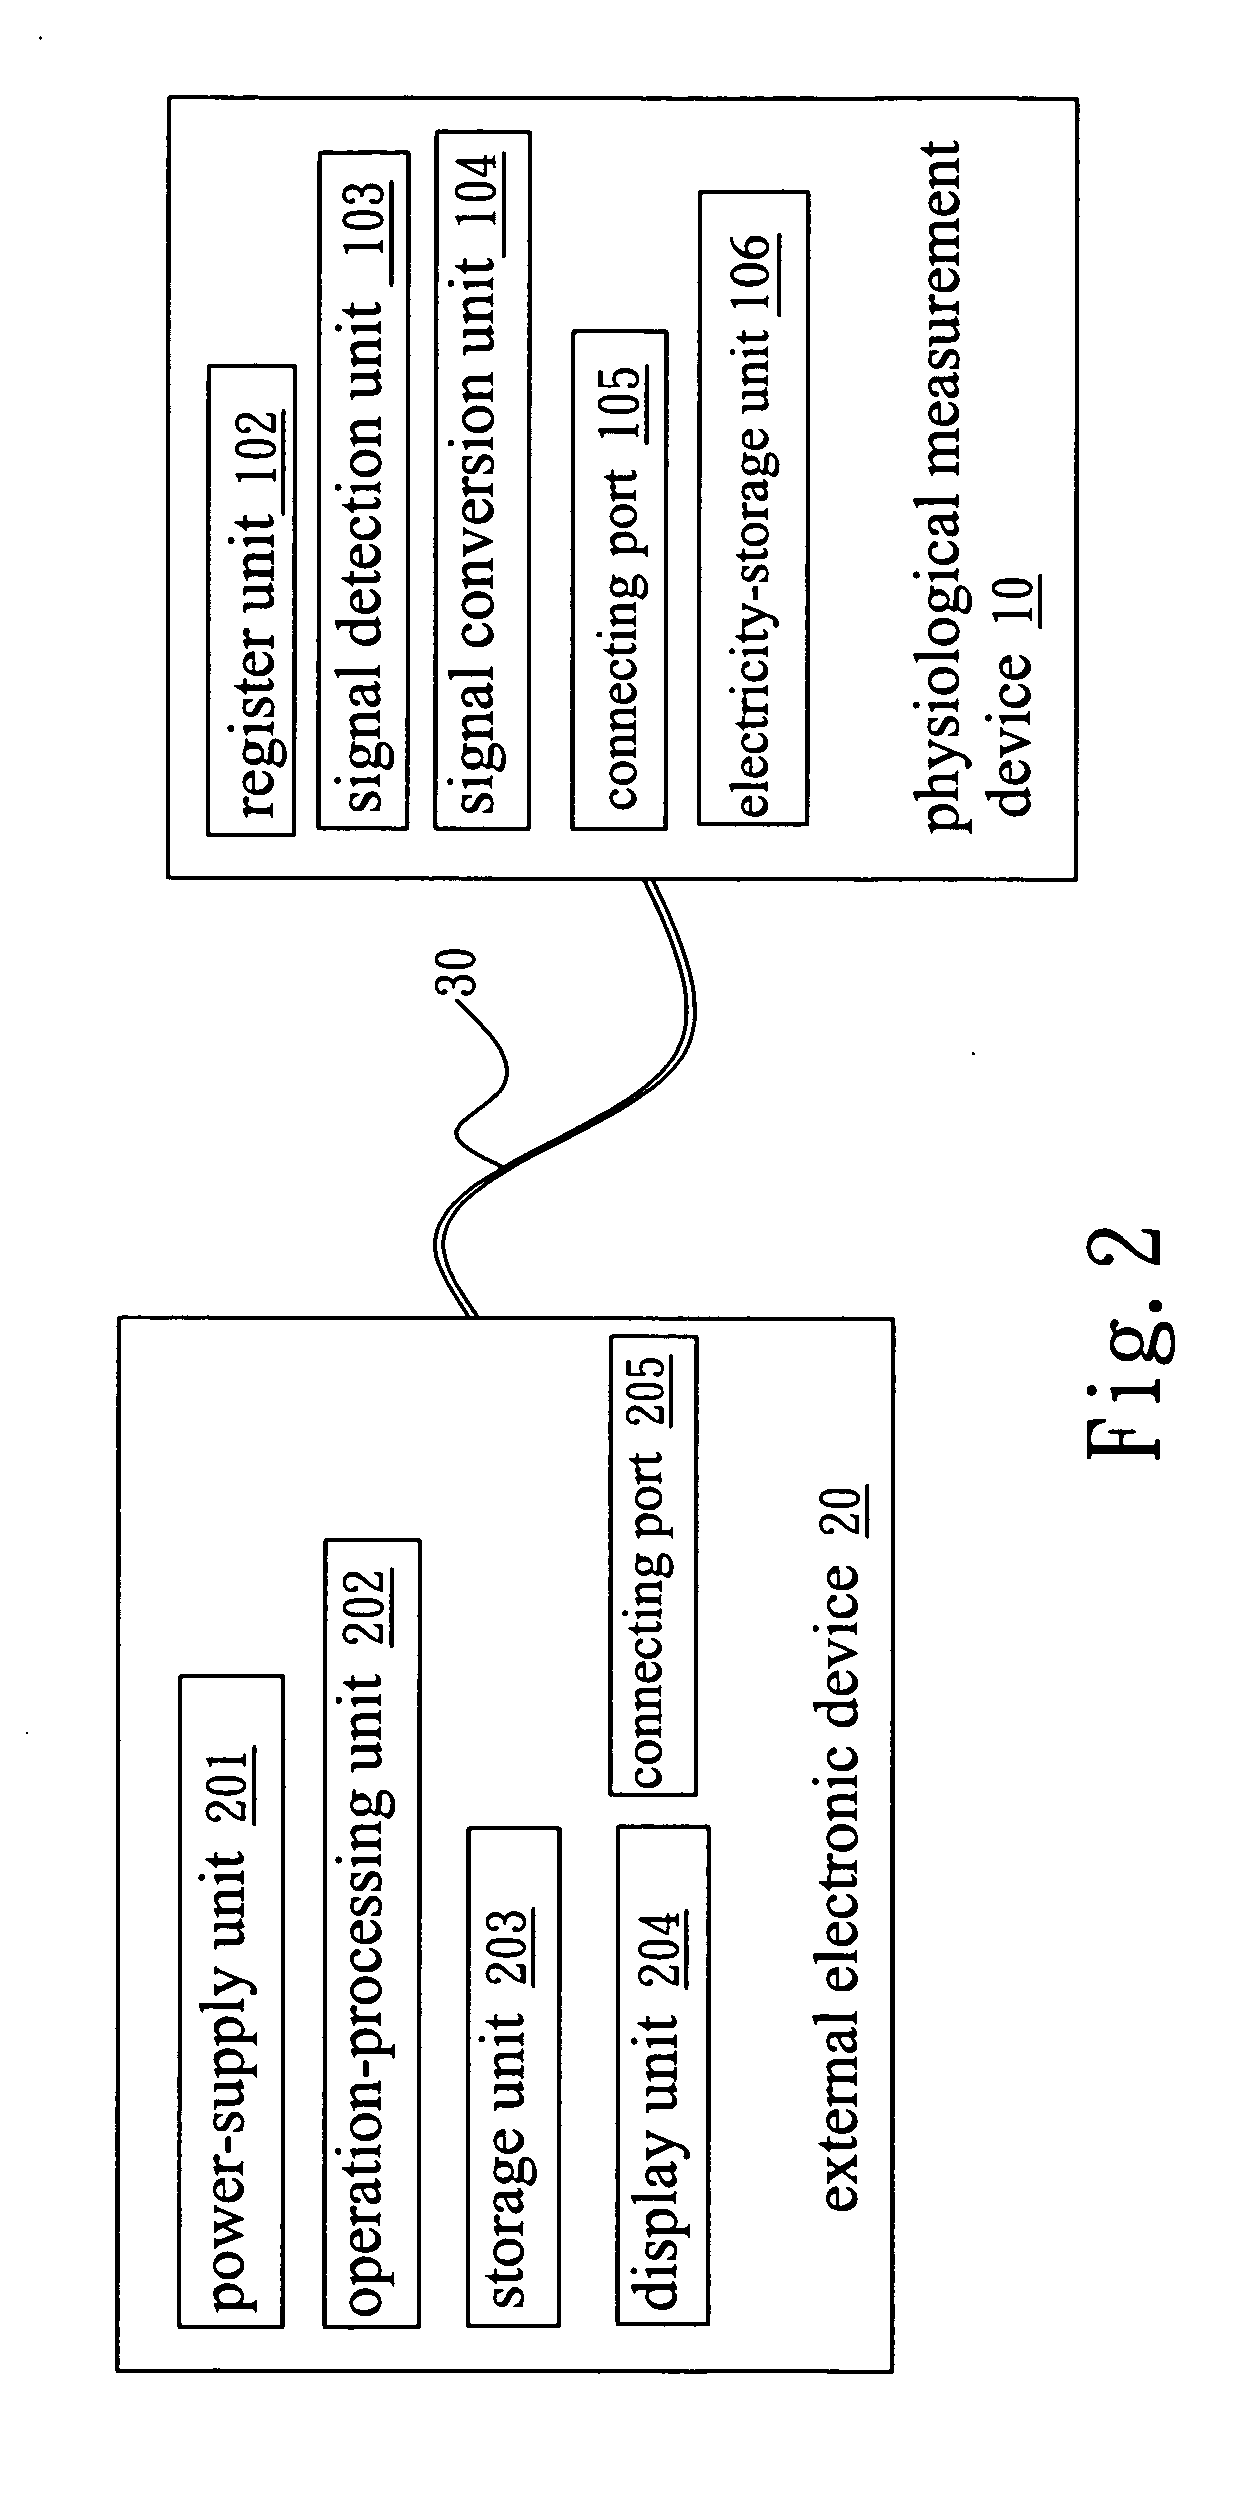 Simplified physiological measurement device